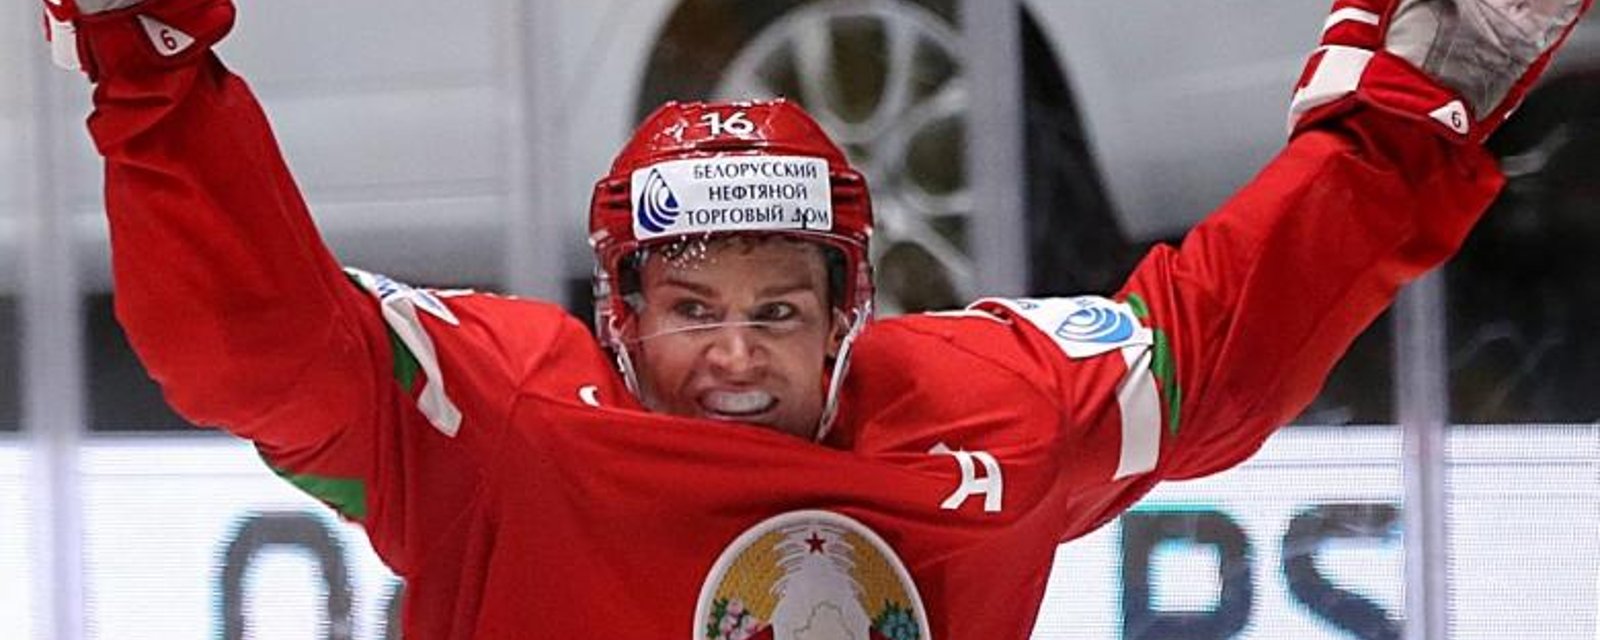 Former NHLer looking to return after successful KHL run.